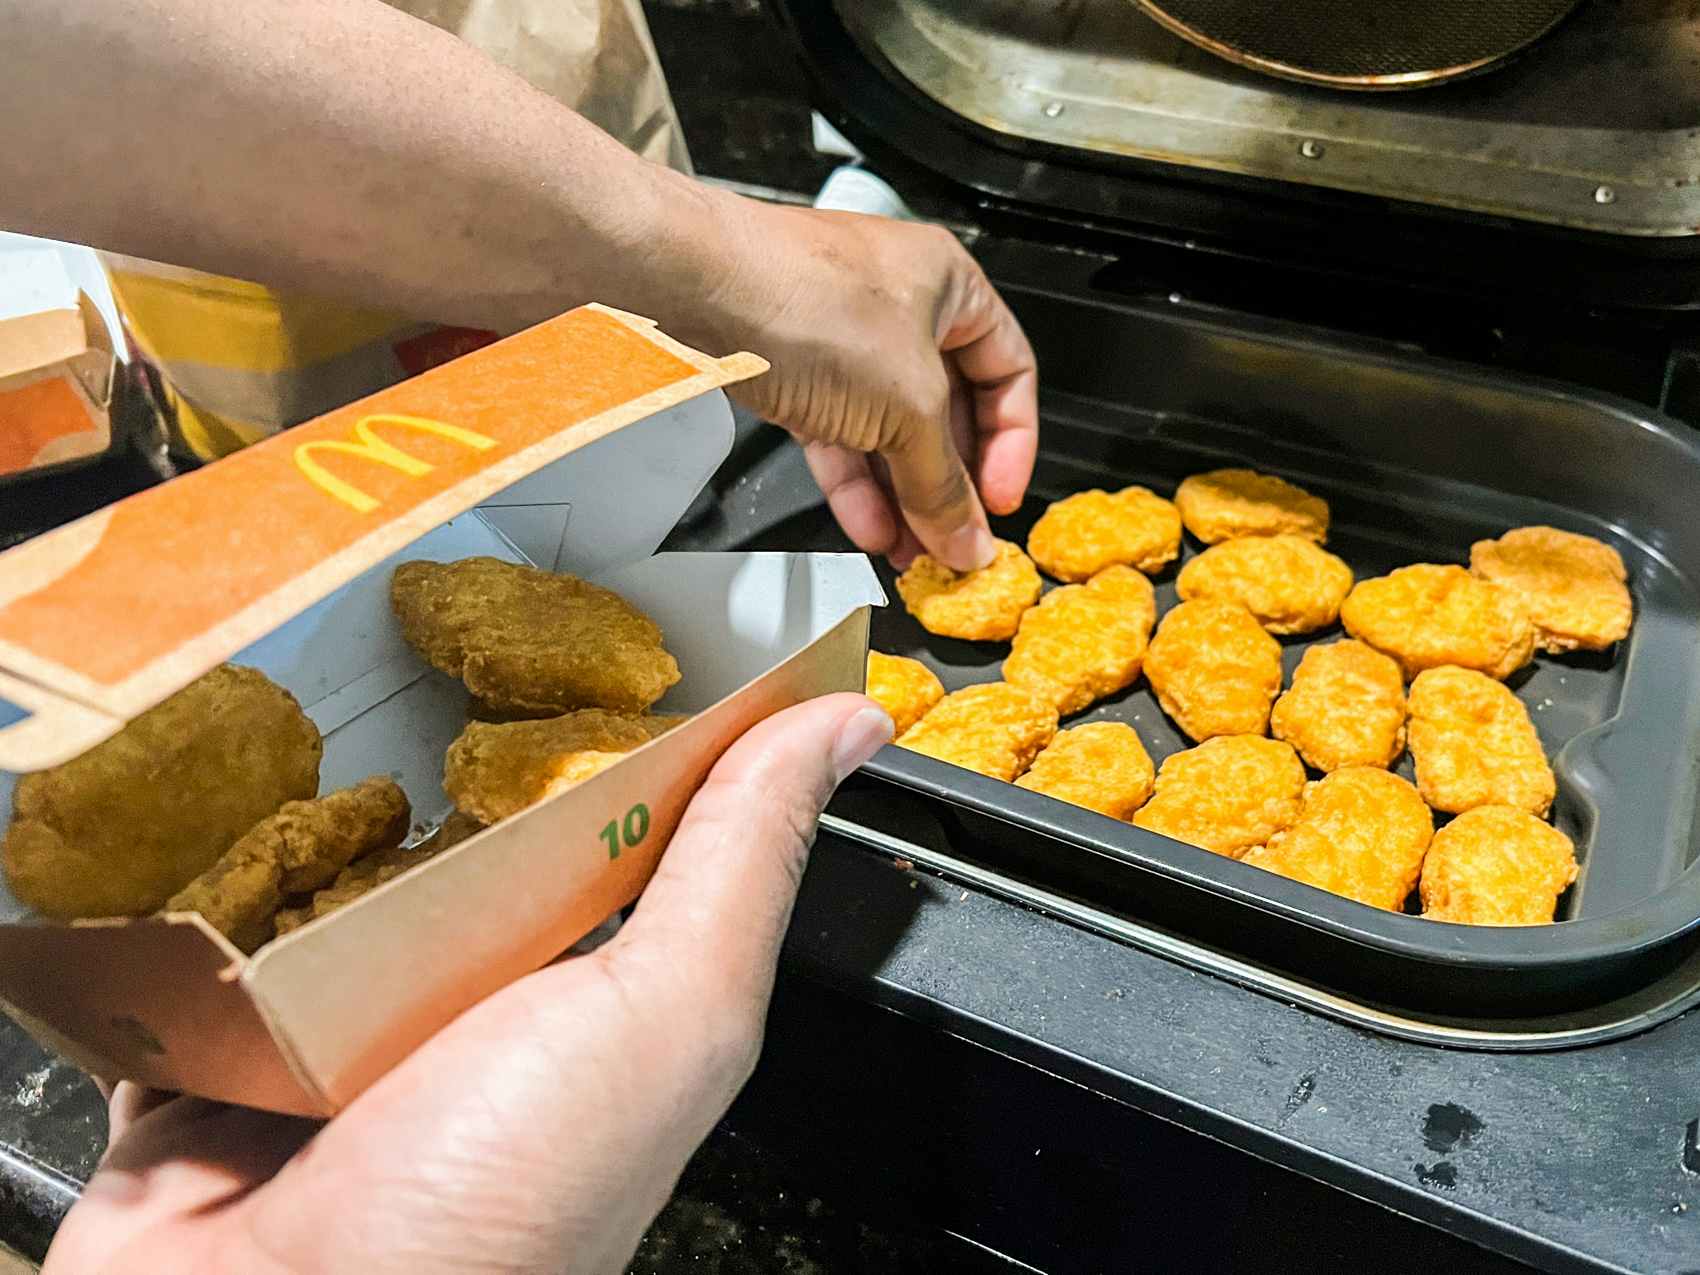 Person putting chicken nuggets into an airfryer